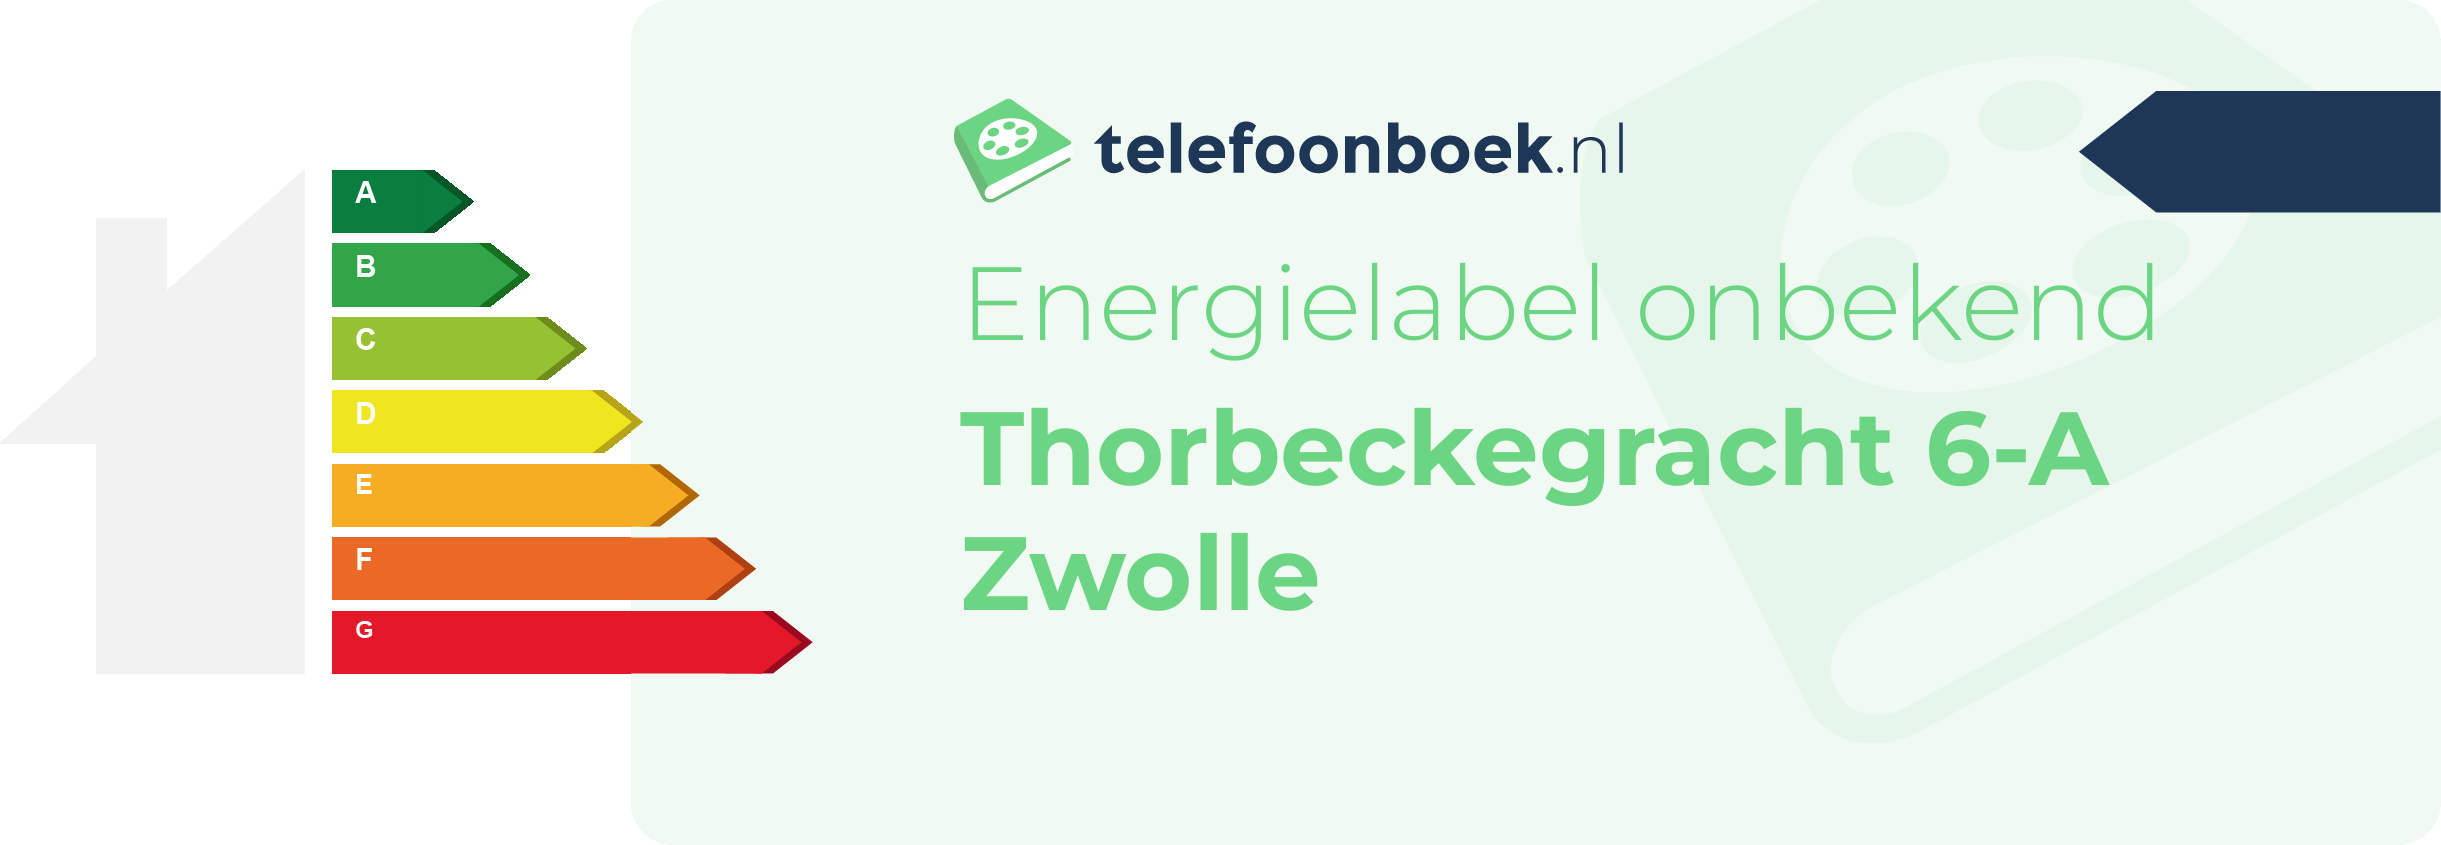 Energielabel Thorbeckegracht 6-A Zwolle